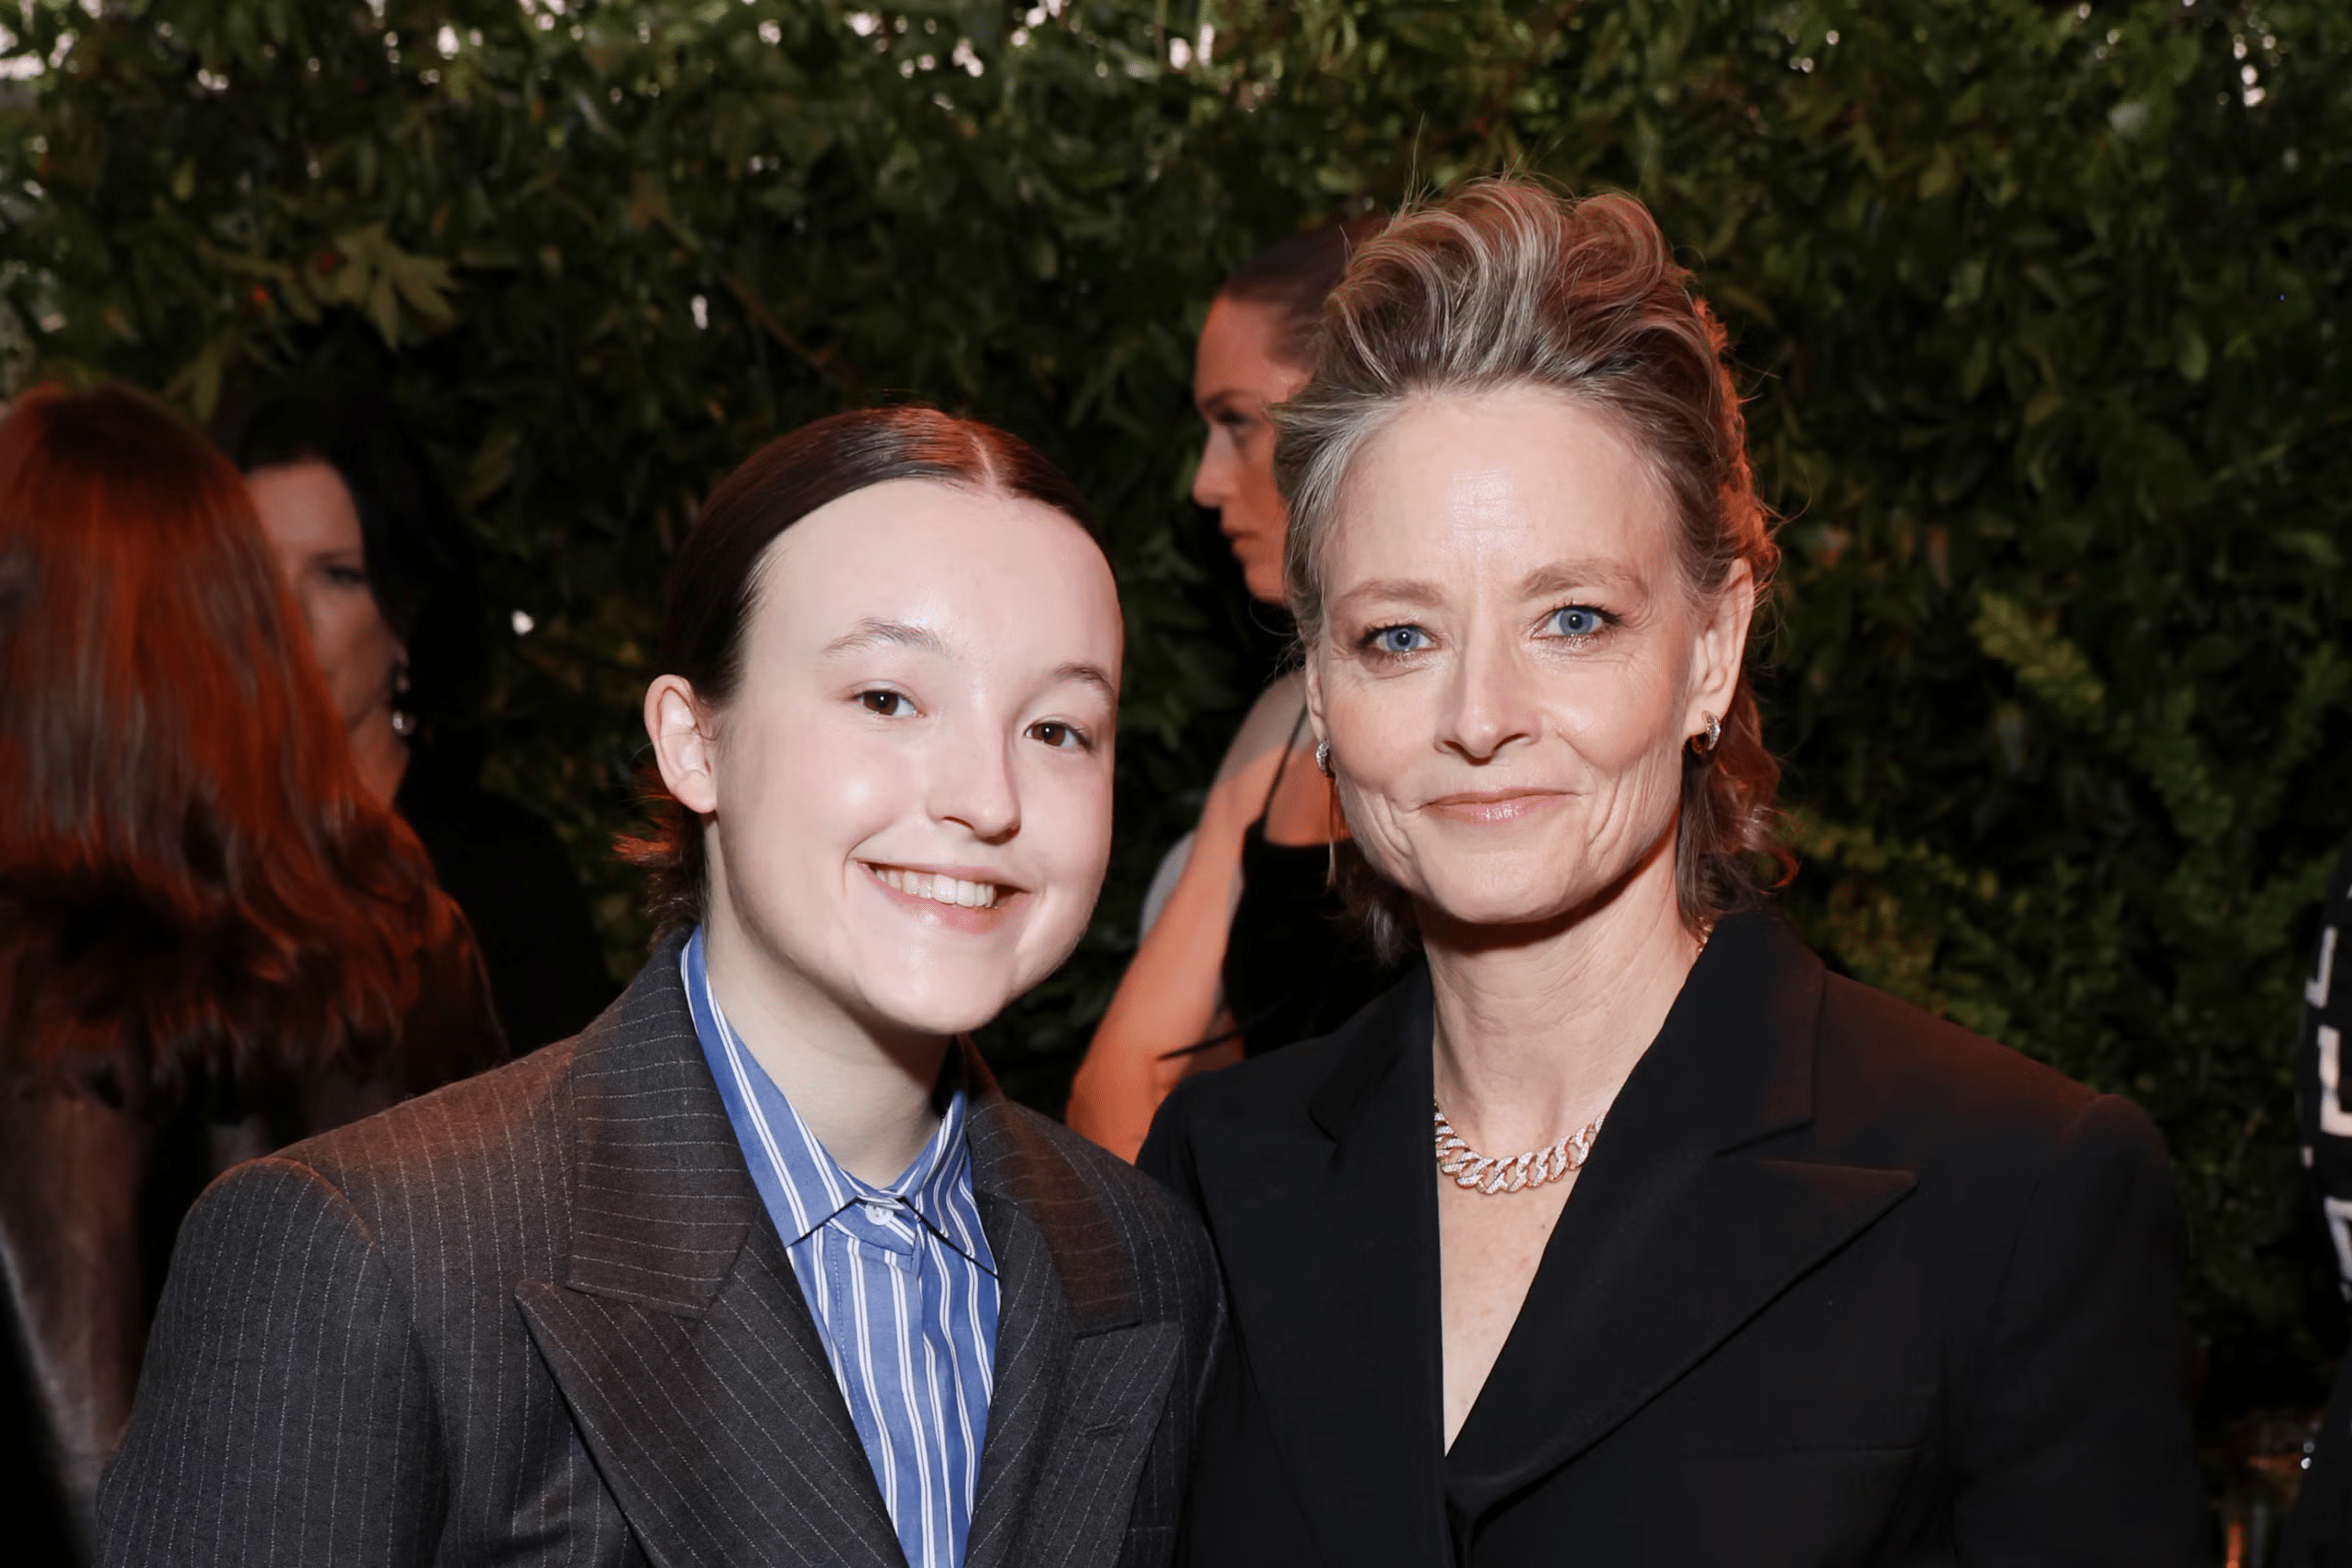 Jodie Foster Calls Gen Z "Really Annoying" To Work With